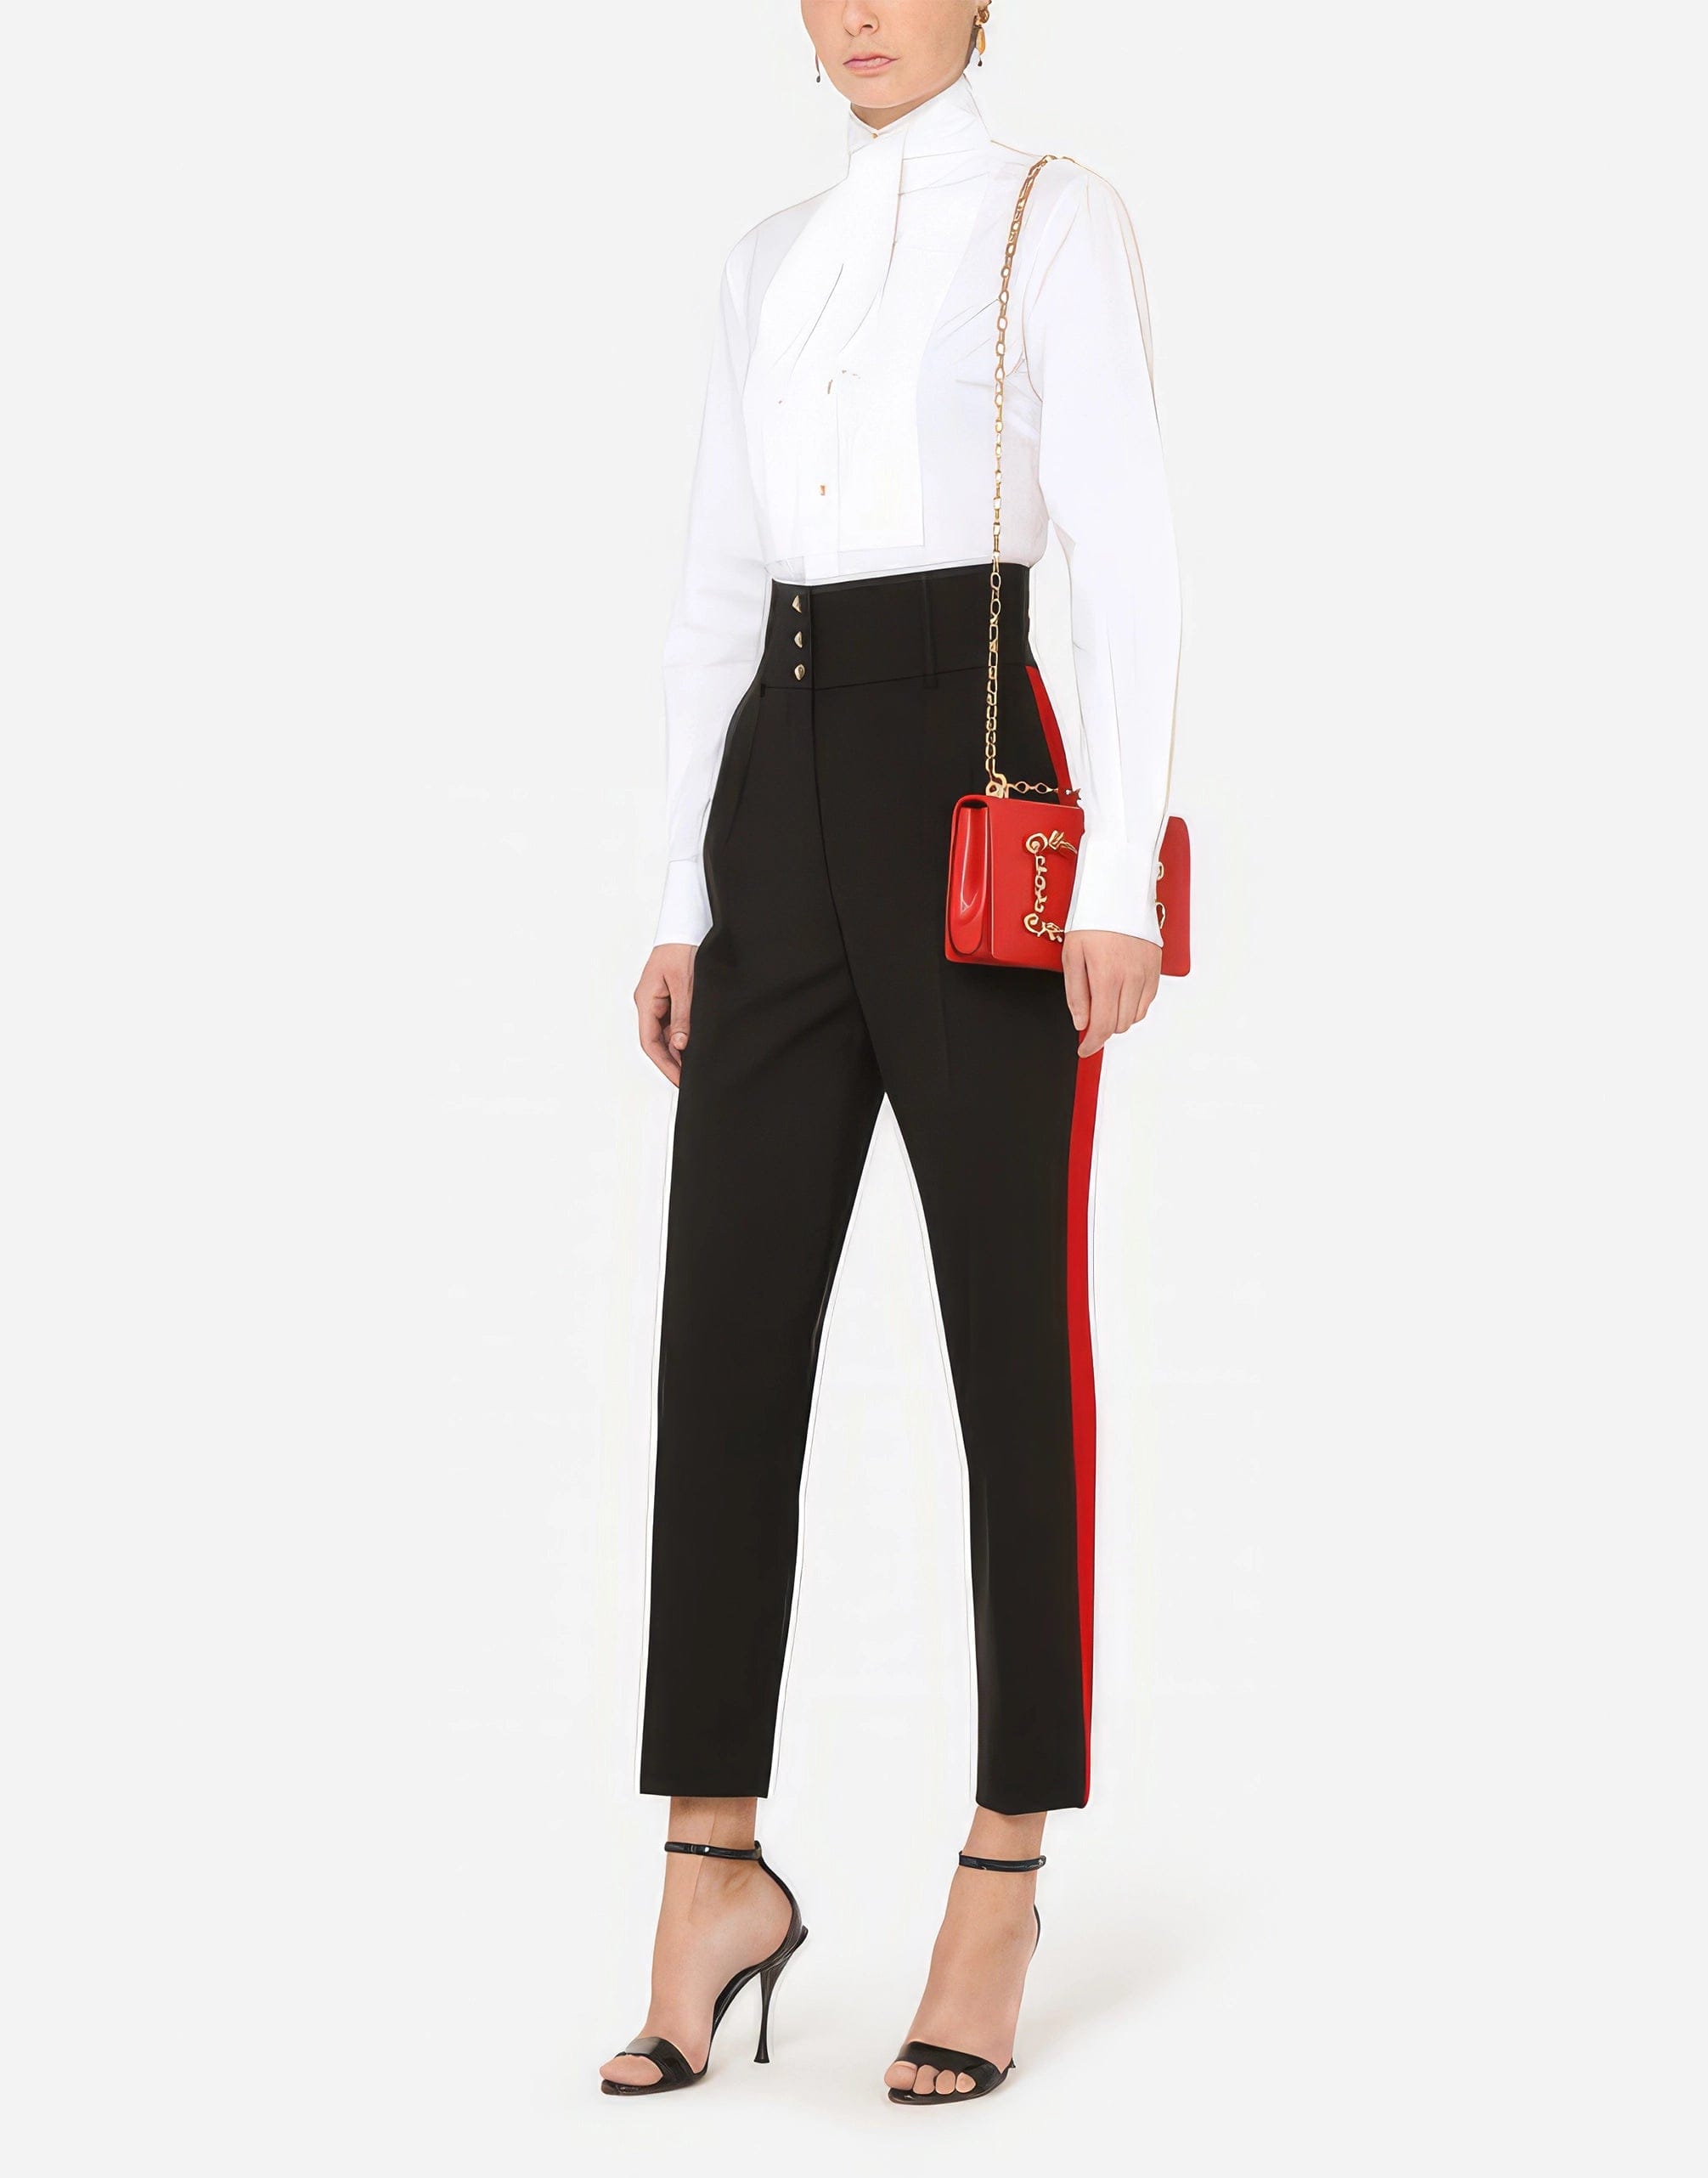 Dolce & Gabbana Contrasting Side Bands High-Waisted Pants